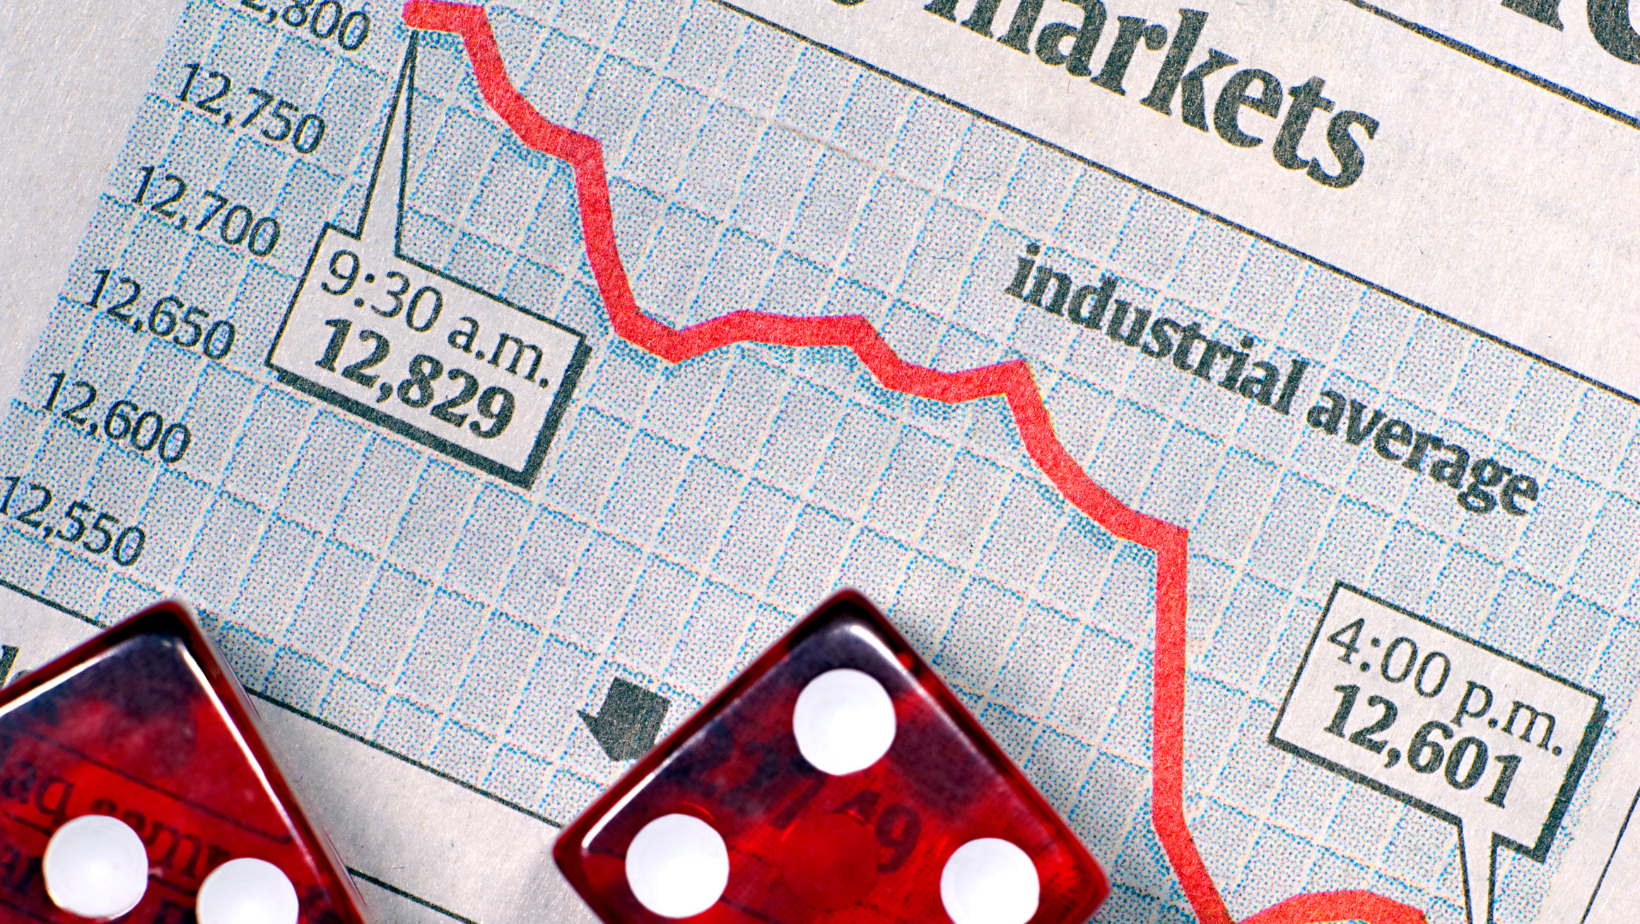 stock market showing downward trajectory with dice implying risks